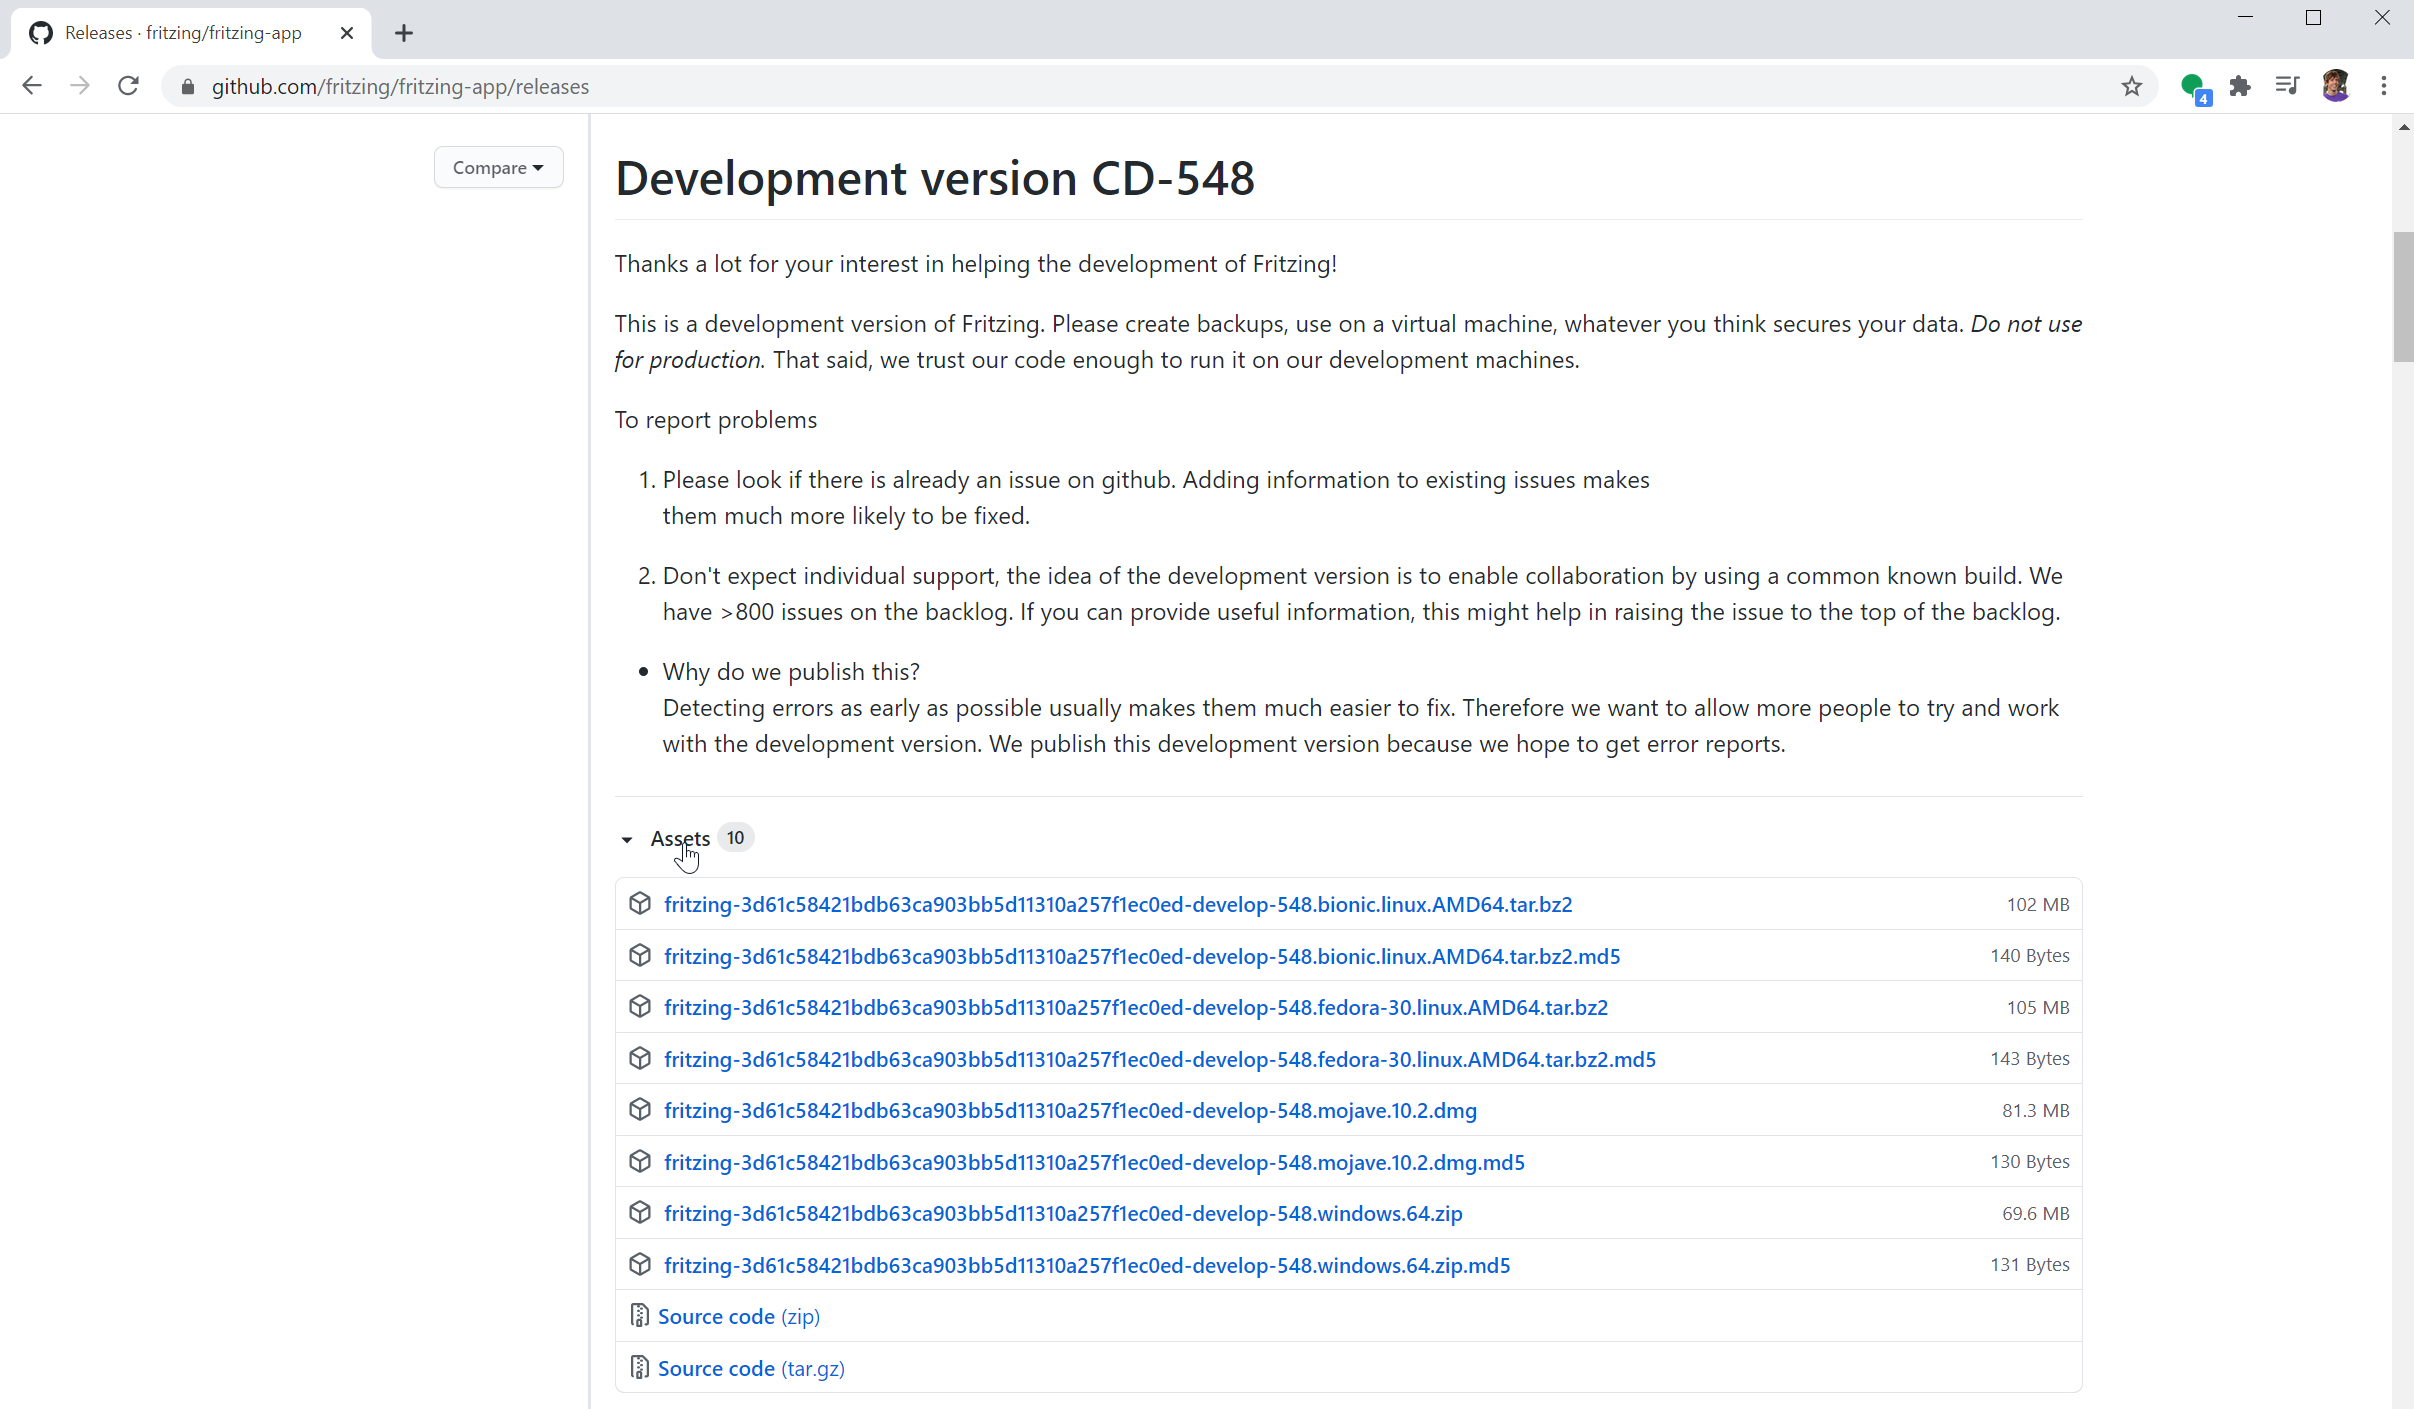 Screenshot of the GitHub releases page for Fritzing